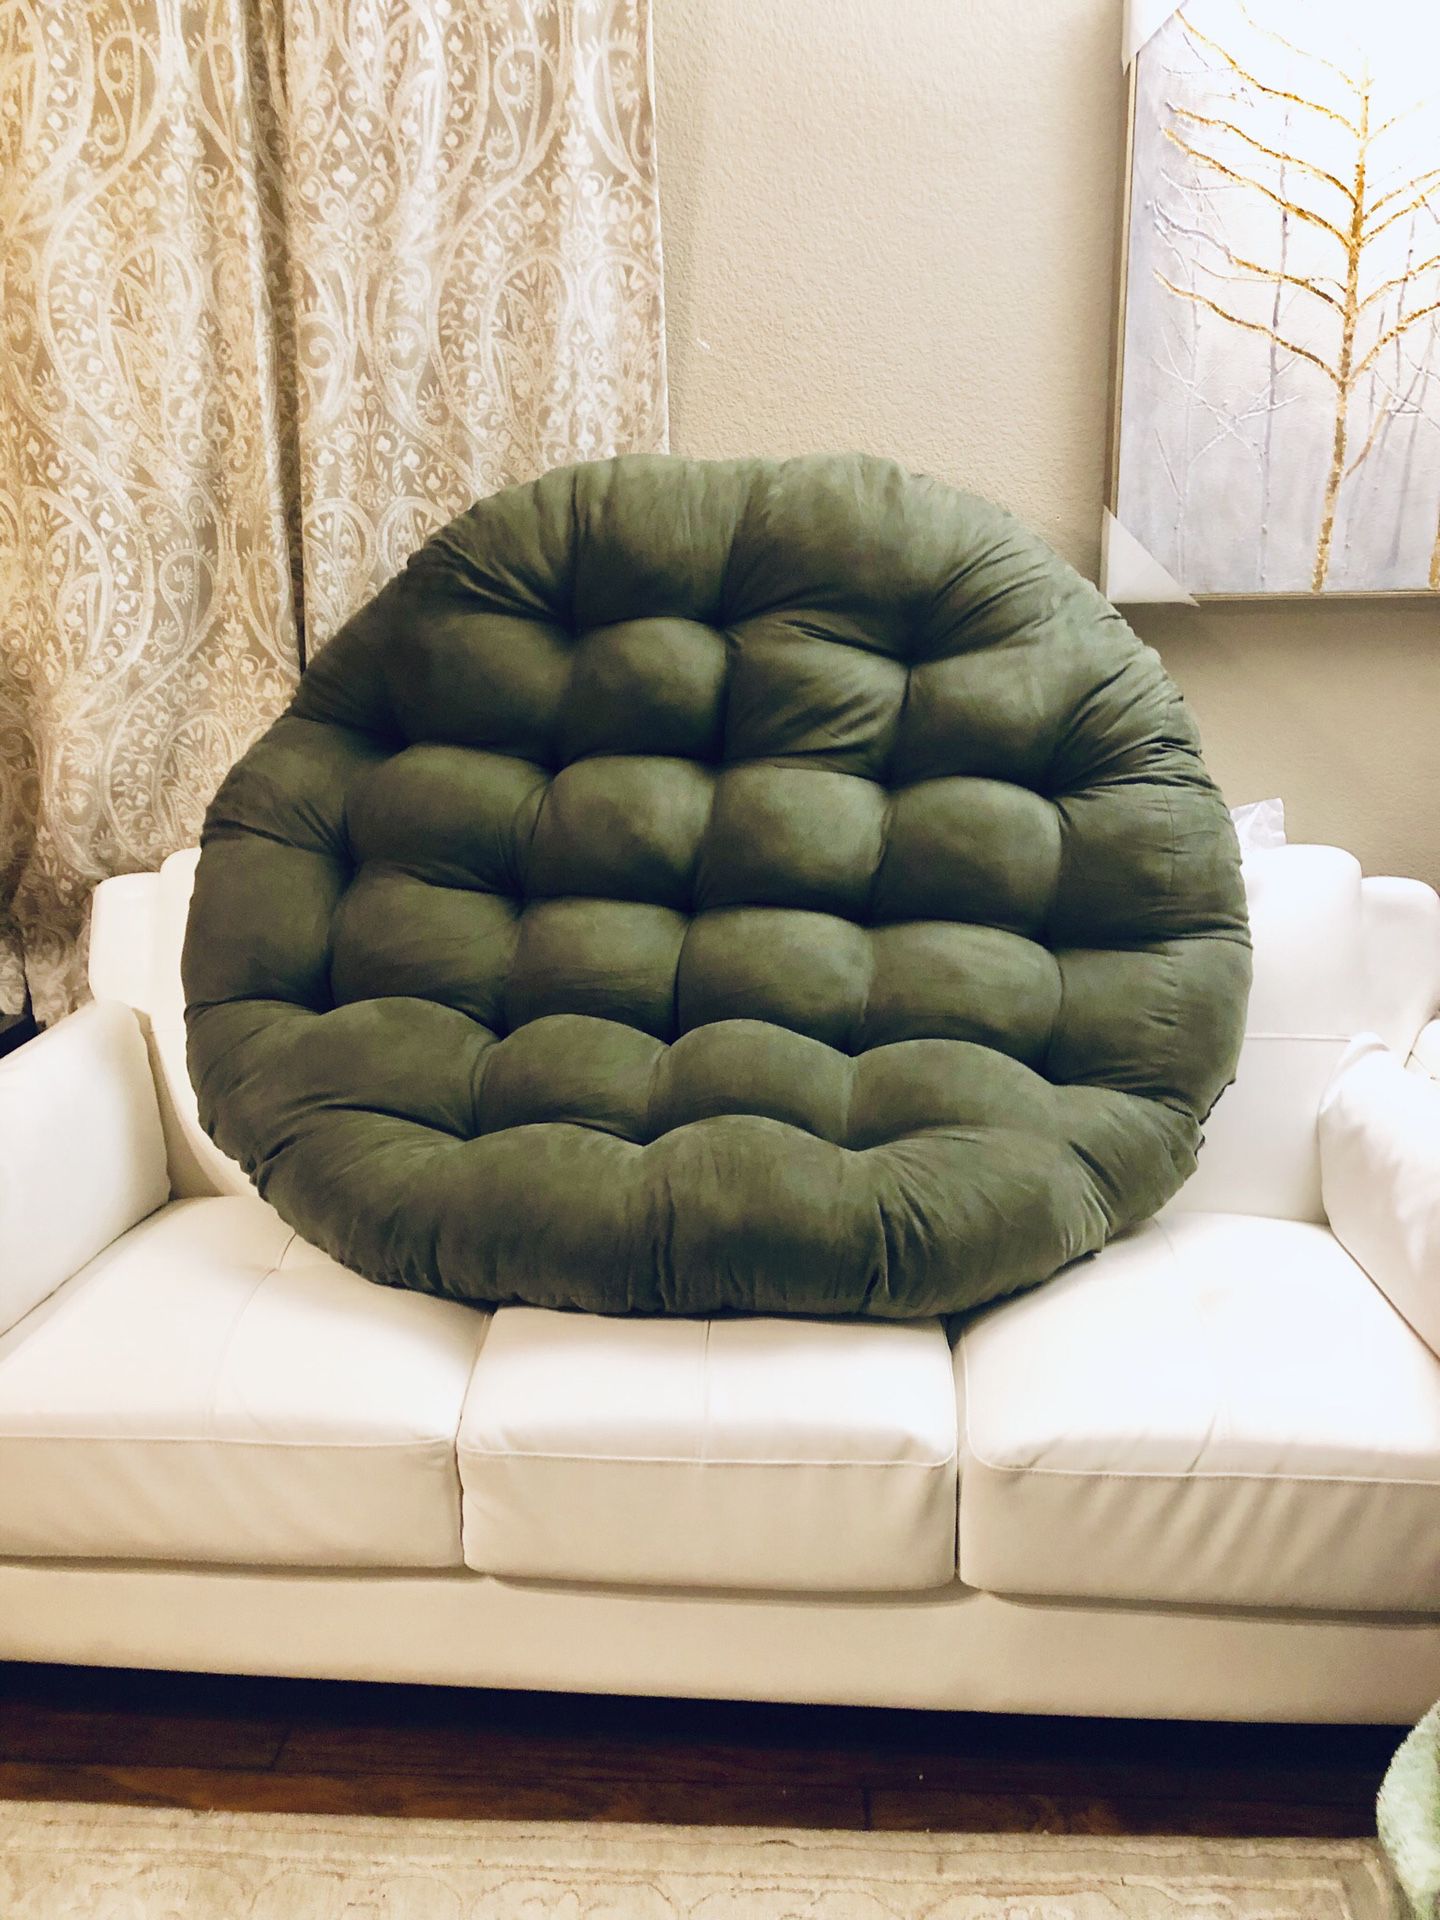 ⭐️New Blazing needle 52” Sage Papasan CUSHION. Or can be used as Doggie Beds.⭐️PICK UP BY ASHLAN AND TEMPERANCE IN CLOVIS